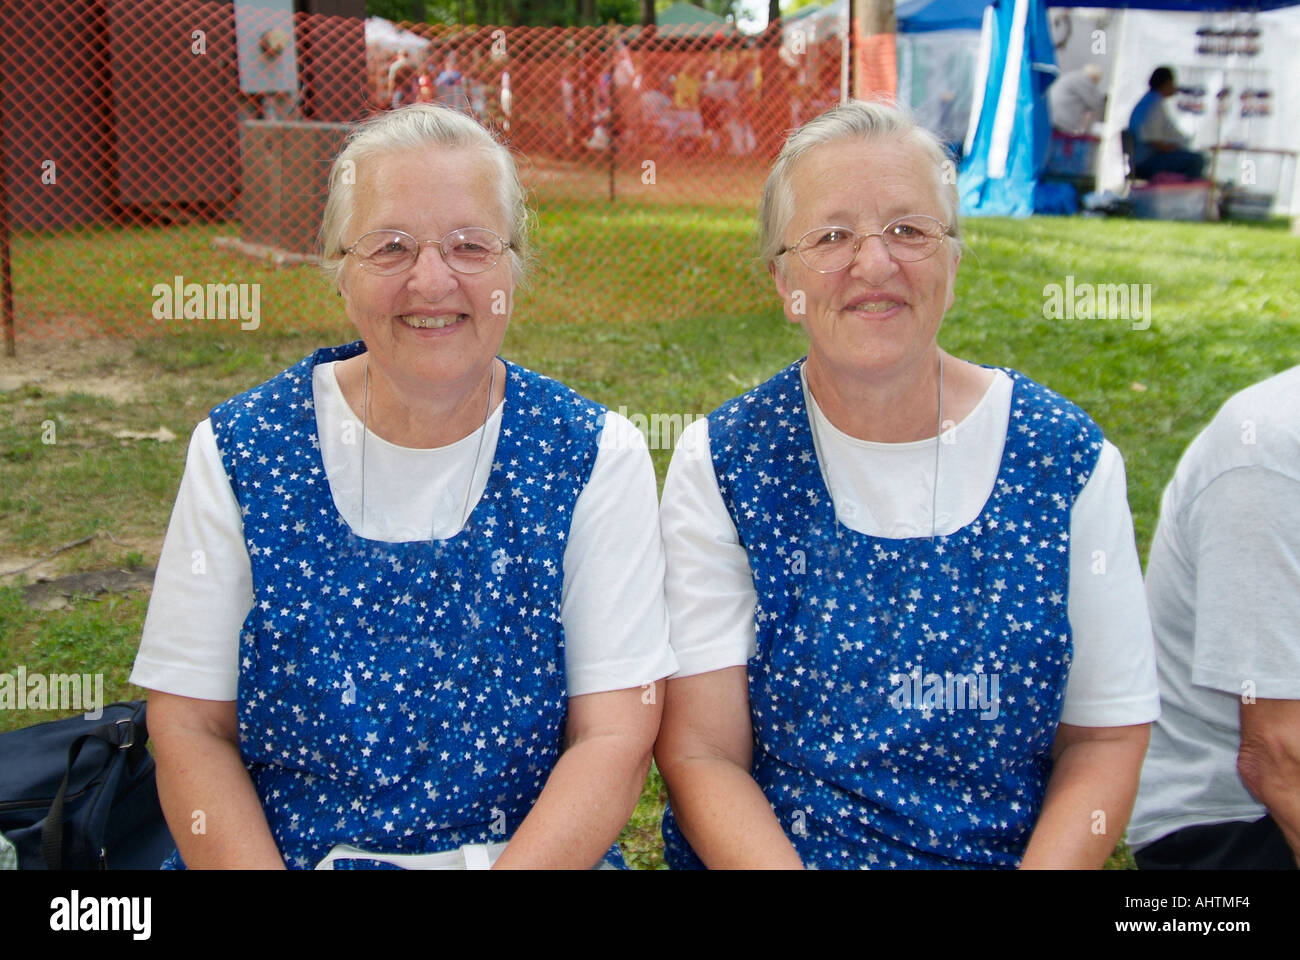 Twin mennonite sisters participate in Twins Convention at Twinsburg Ohio Stock Photo